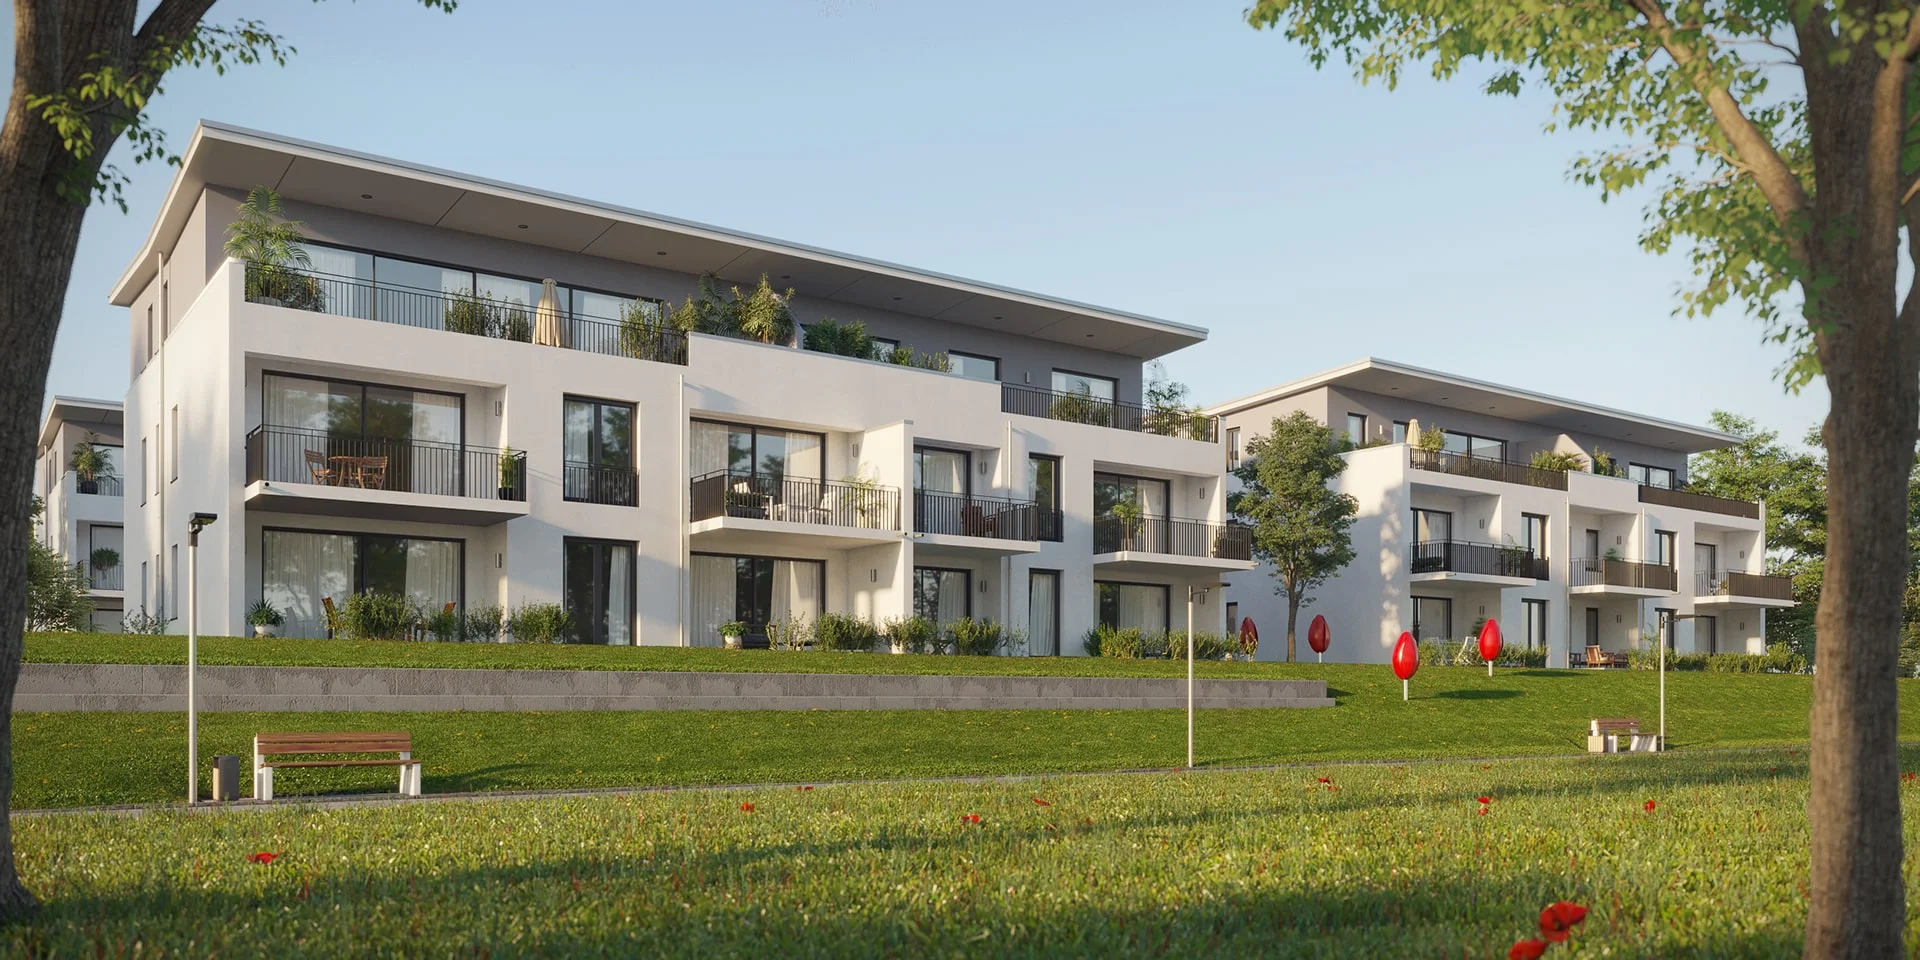 Architectural visualization. Multi-family houses. View from the courtyard